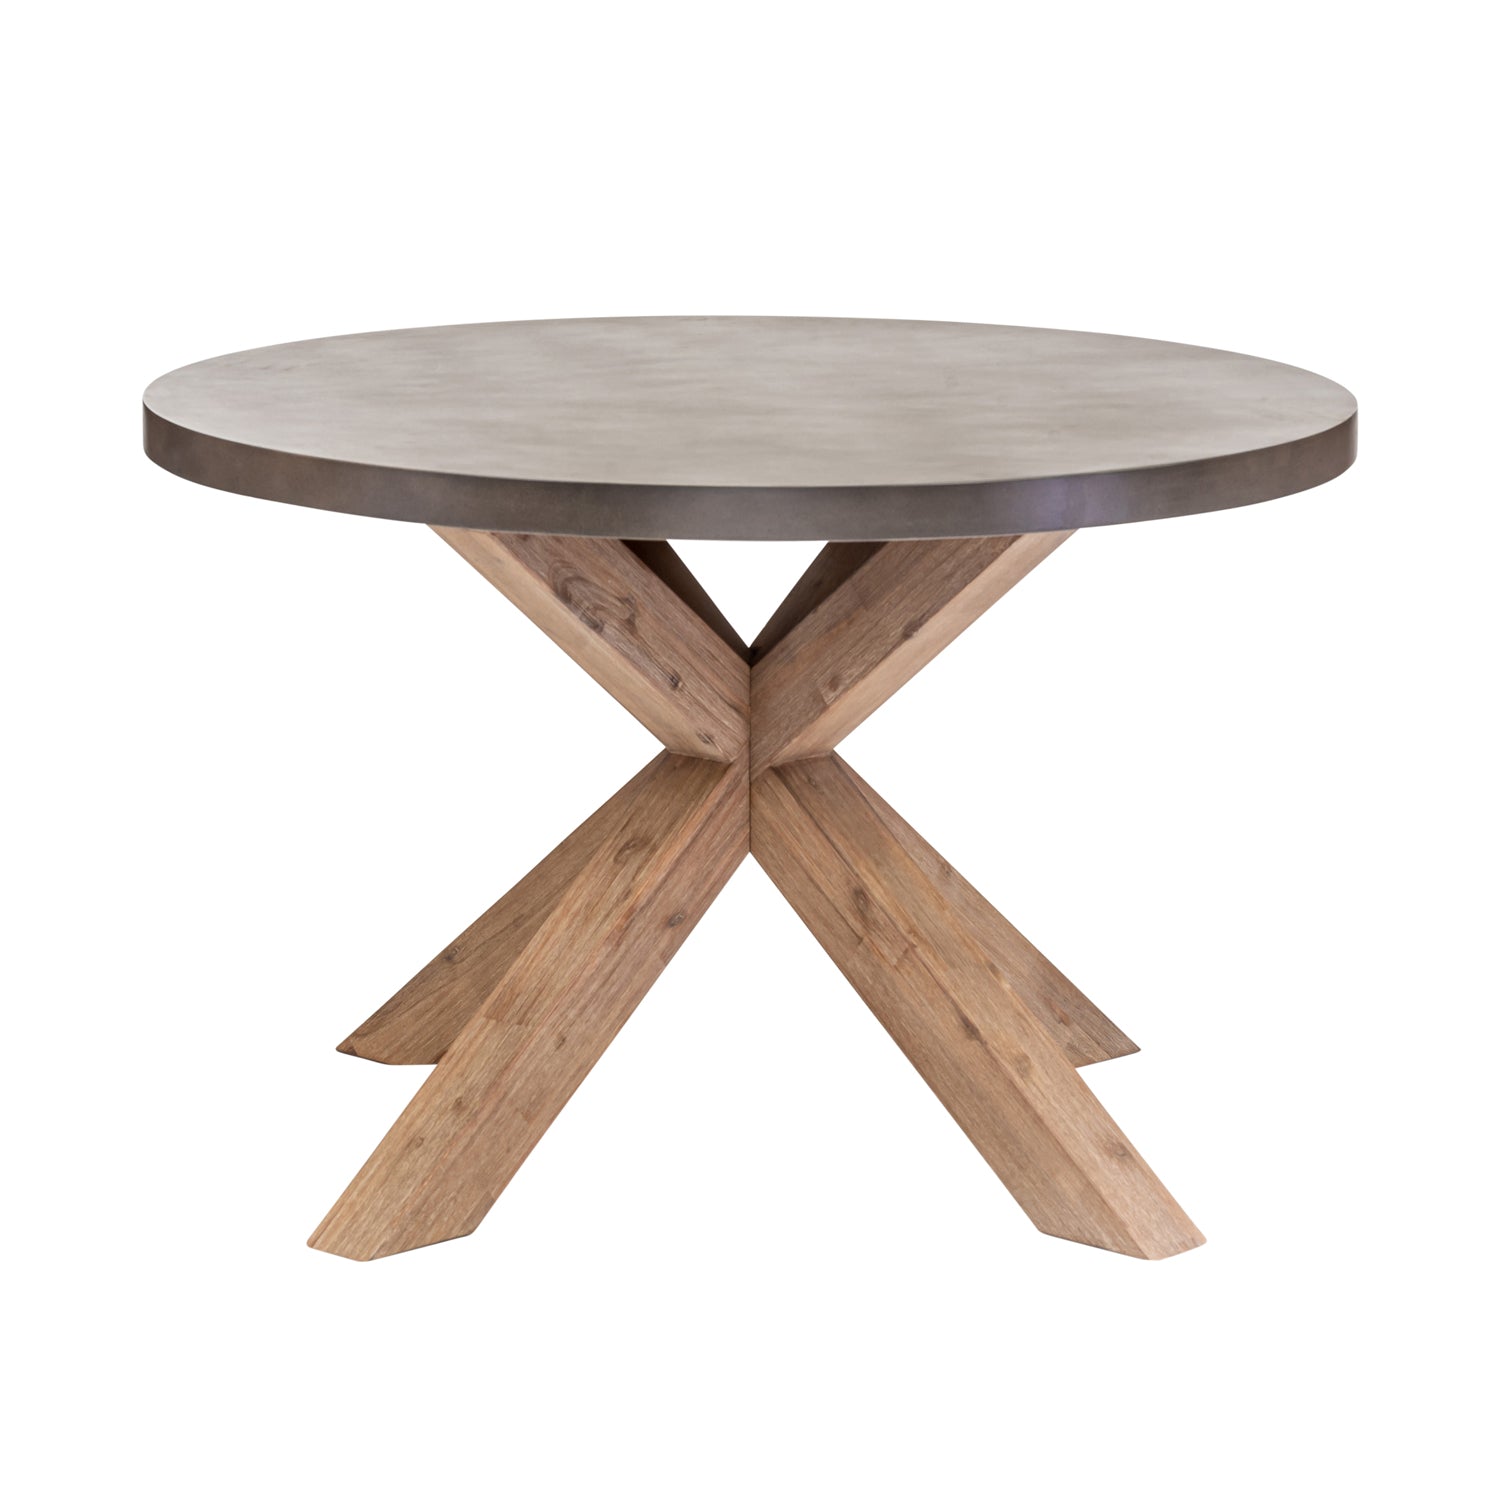 Concrete Effect Round Dining Table Contemporary Dining Collections Better Furniture